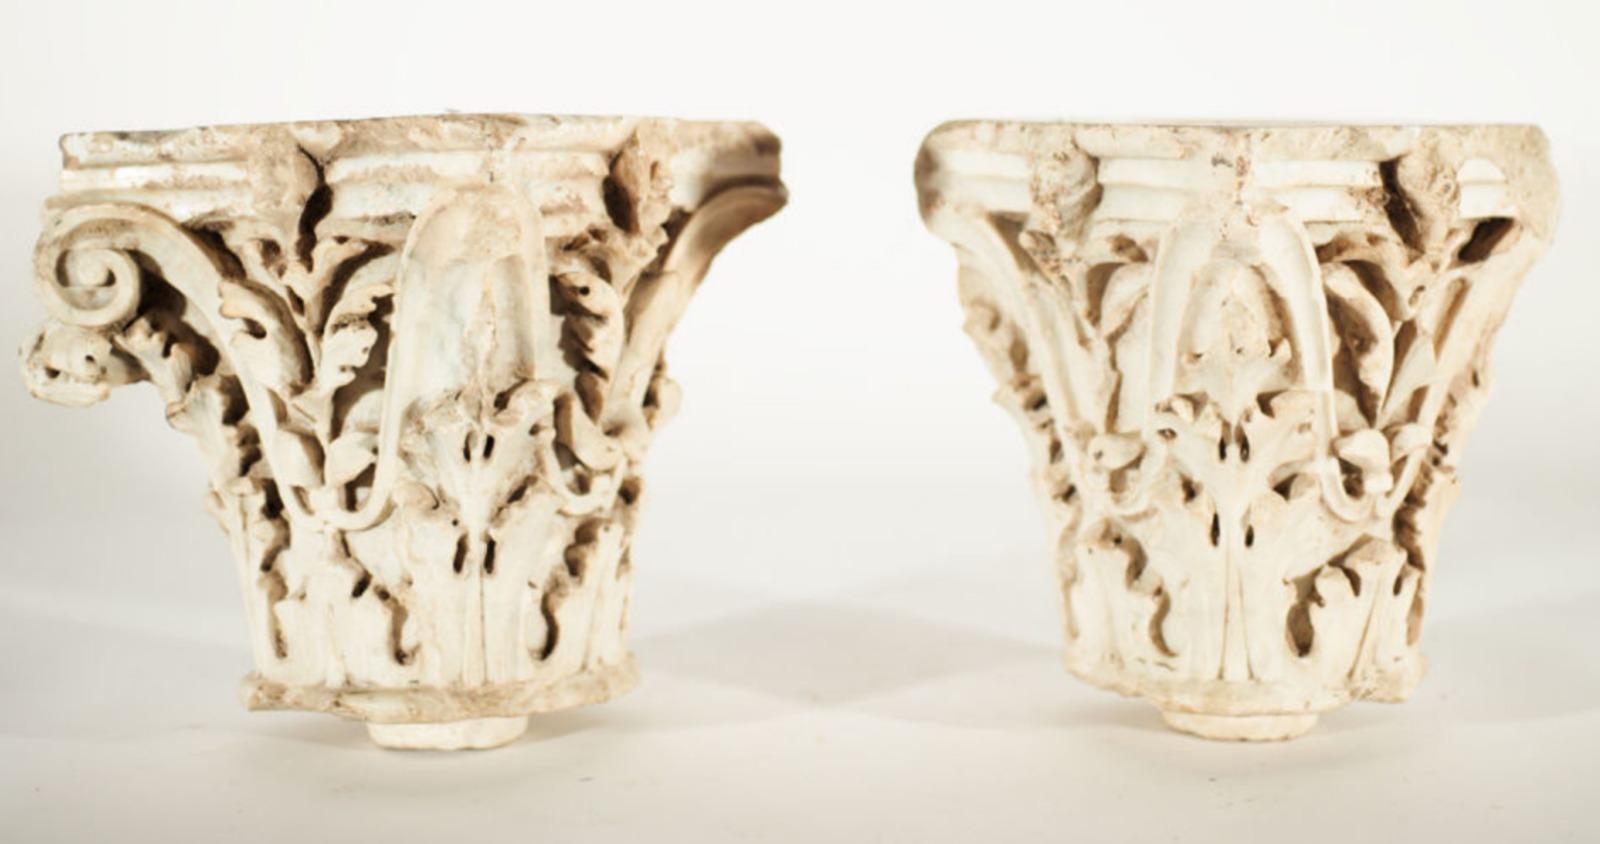 Gothic Pair of Important Capitals in White Marble in the Corinthian Style 15th Century